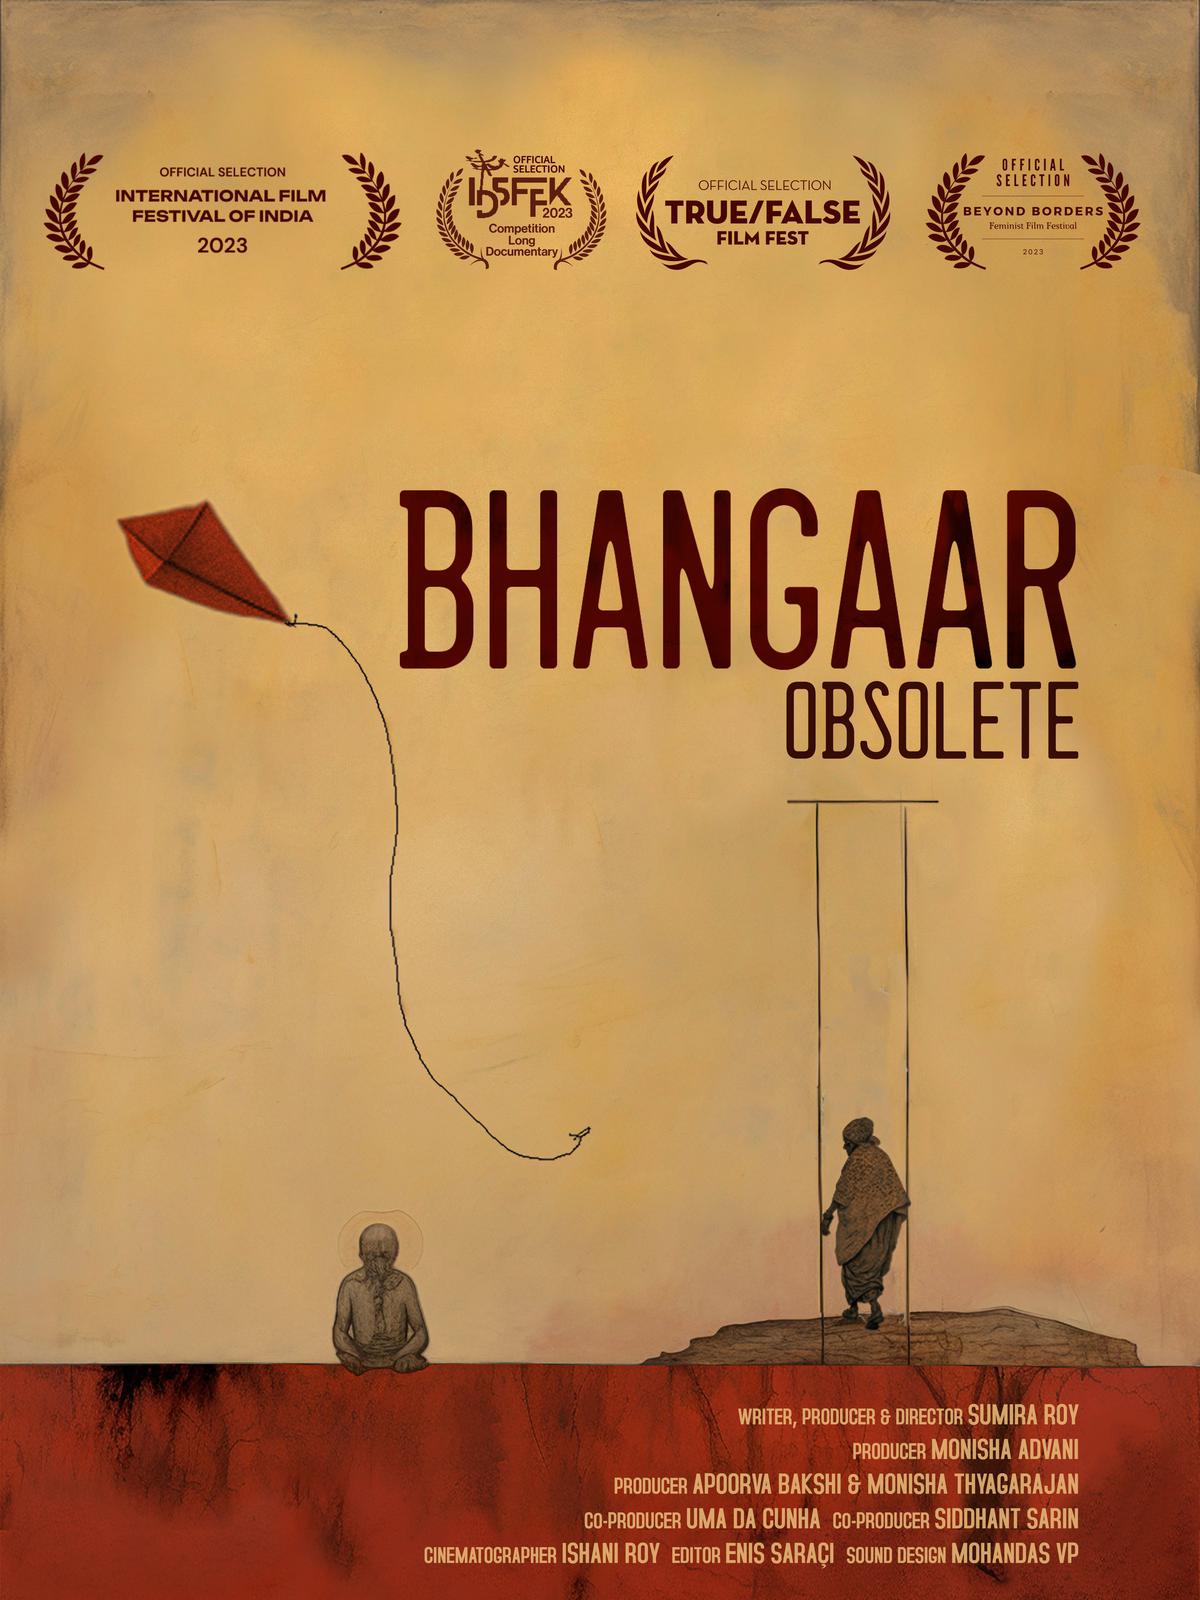 The poster of the film